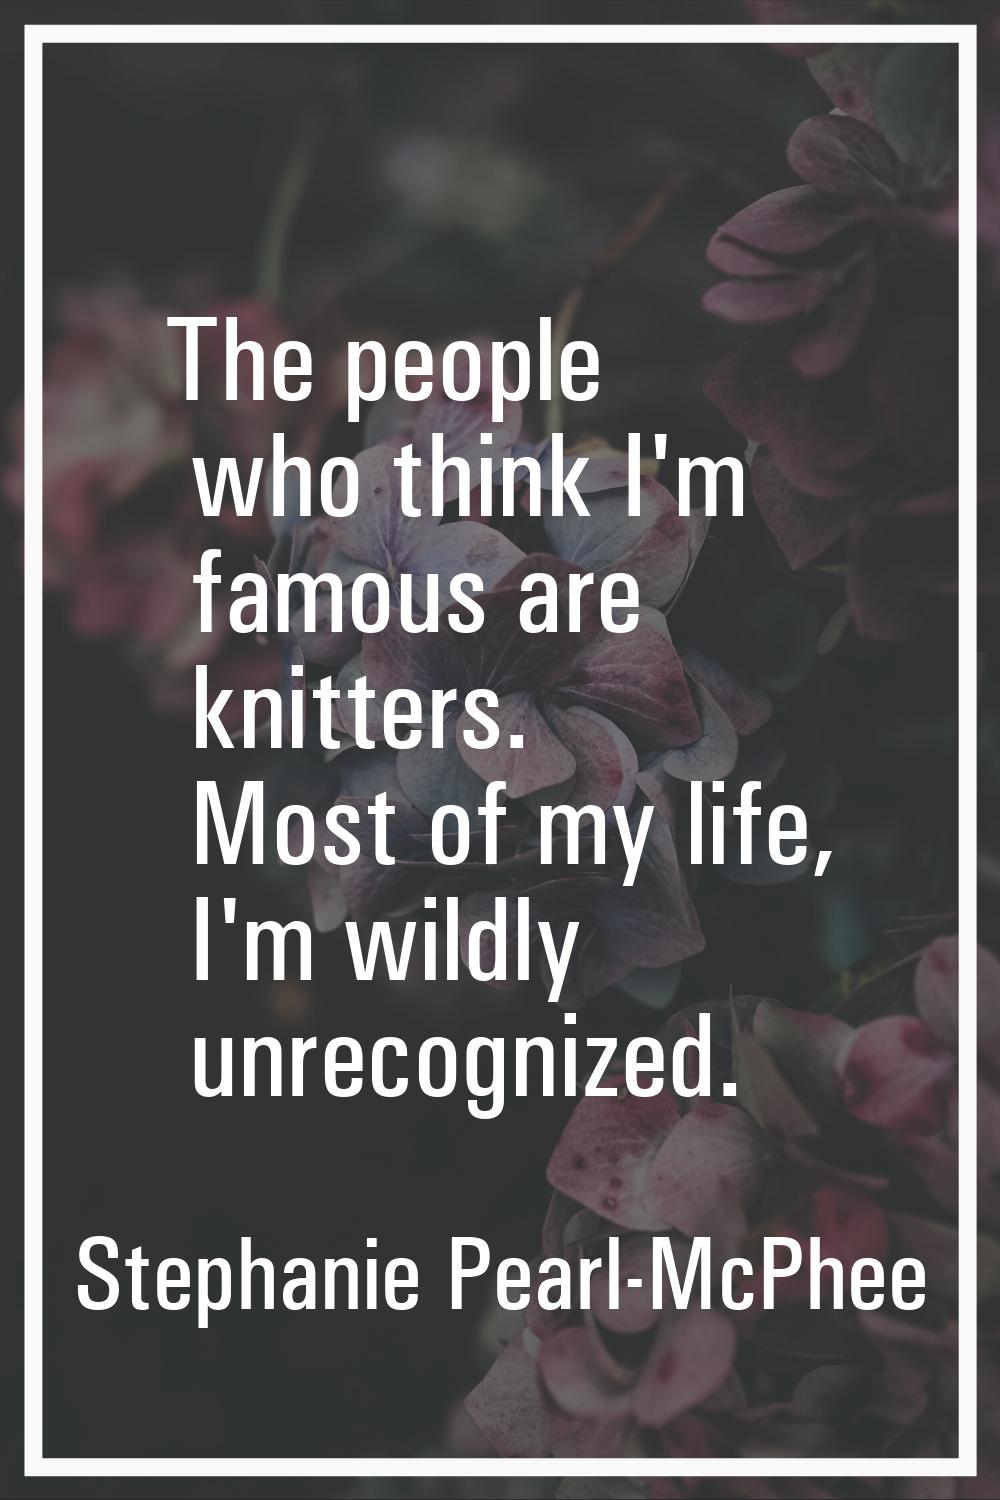 The people who think I'm famous are knitters. Most of my life, I'm wildly unrecognized.